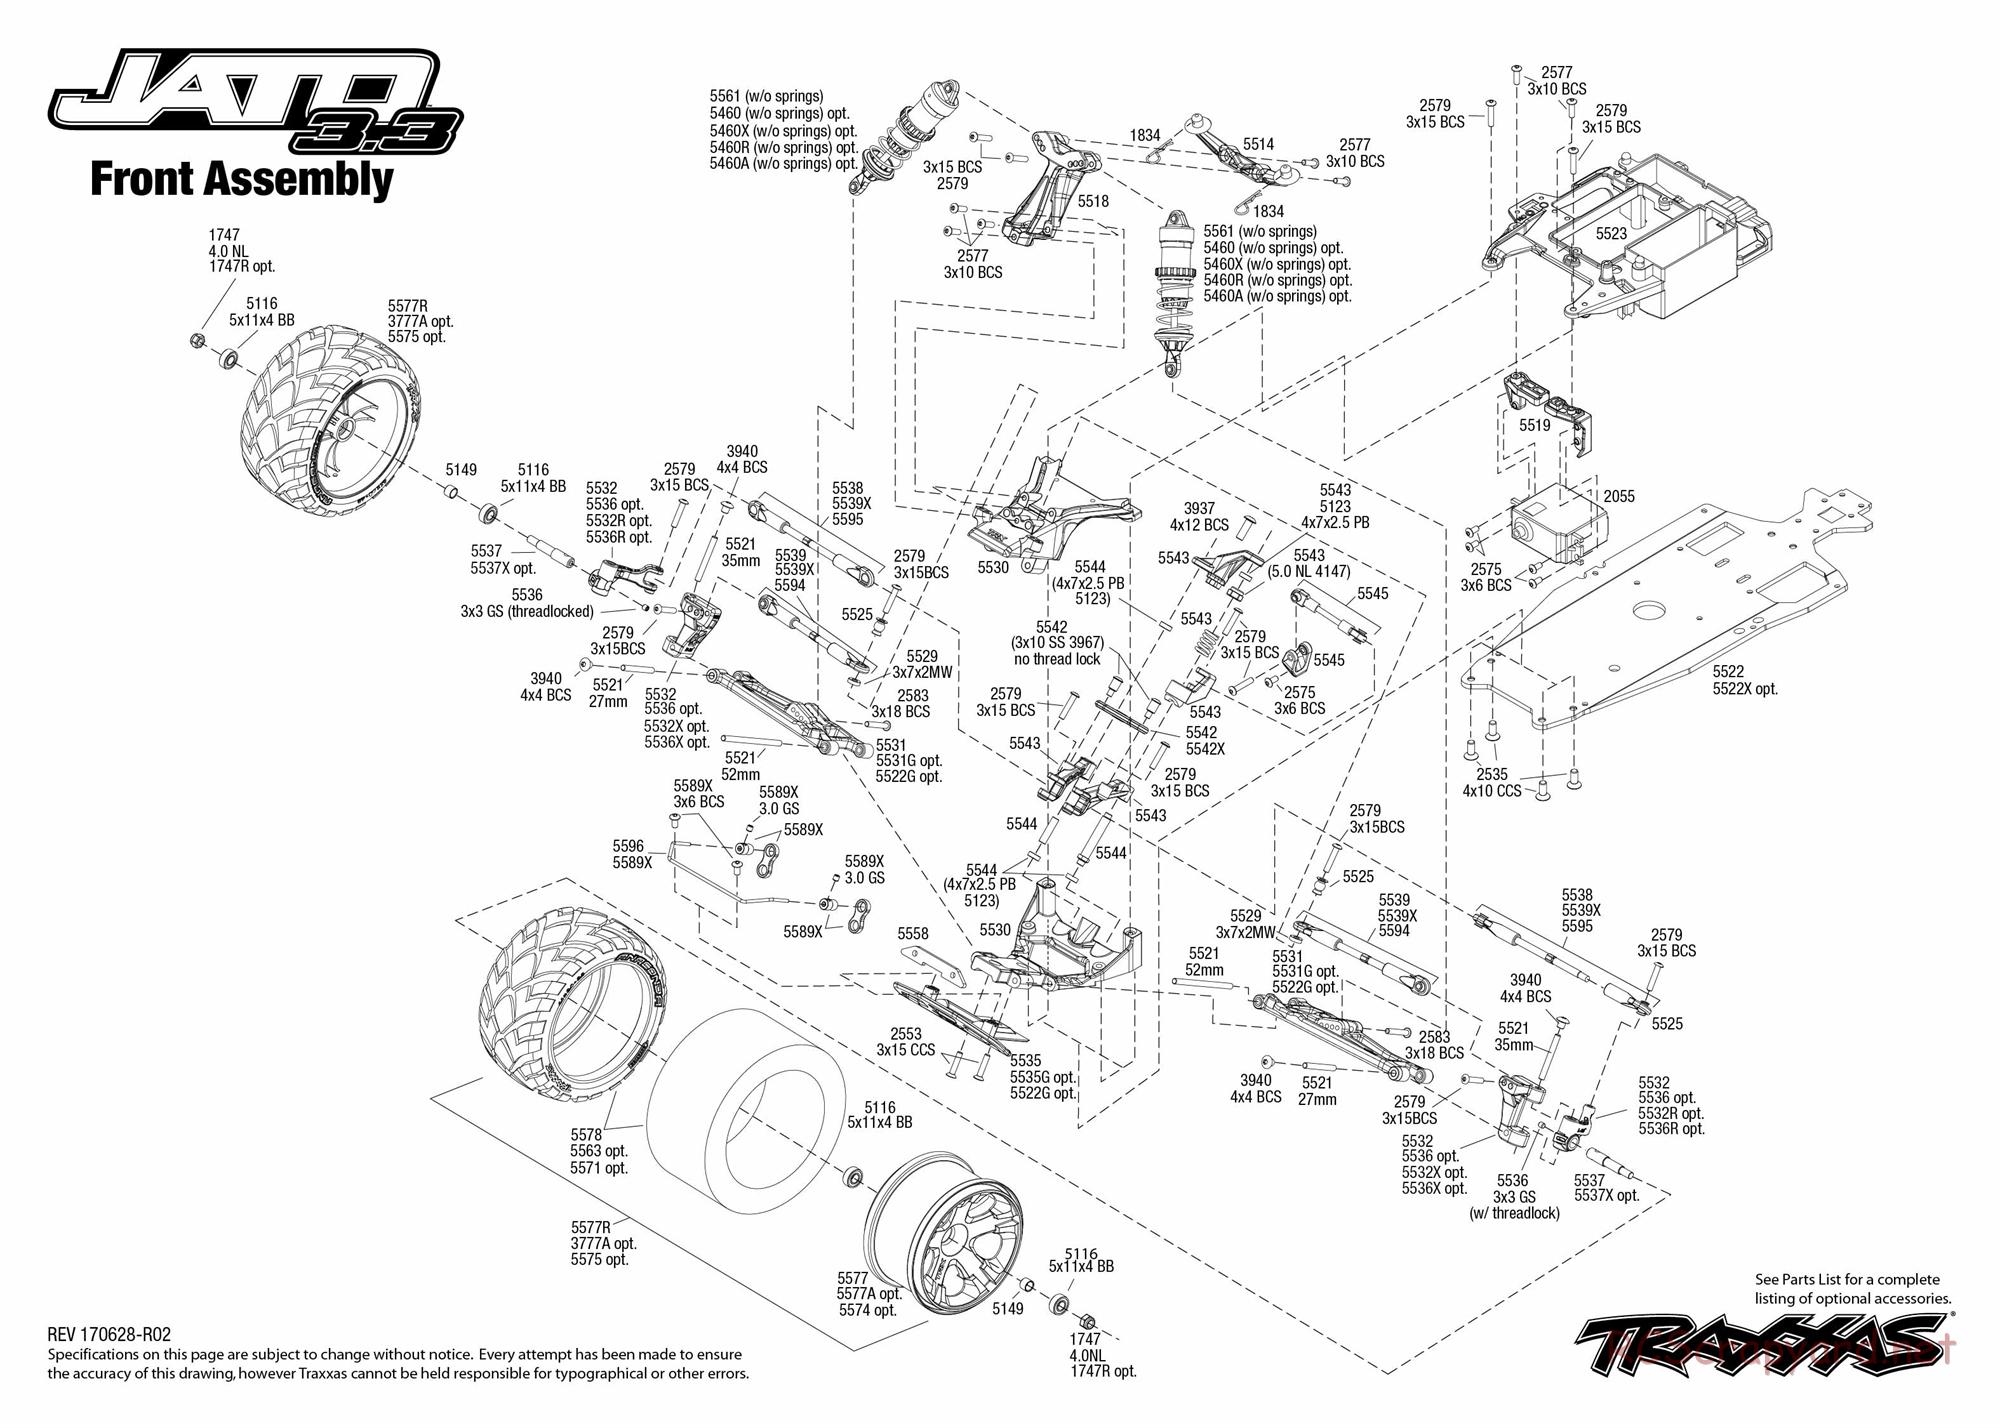 Traxxas - Jato 3.3 (2014) - Exploded Views - Page 3